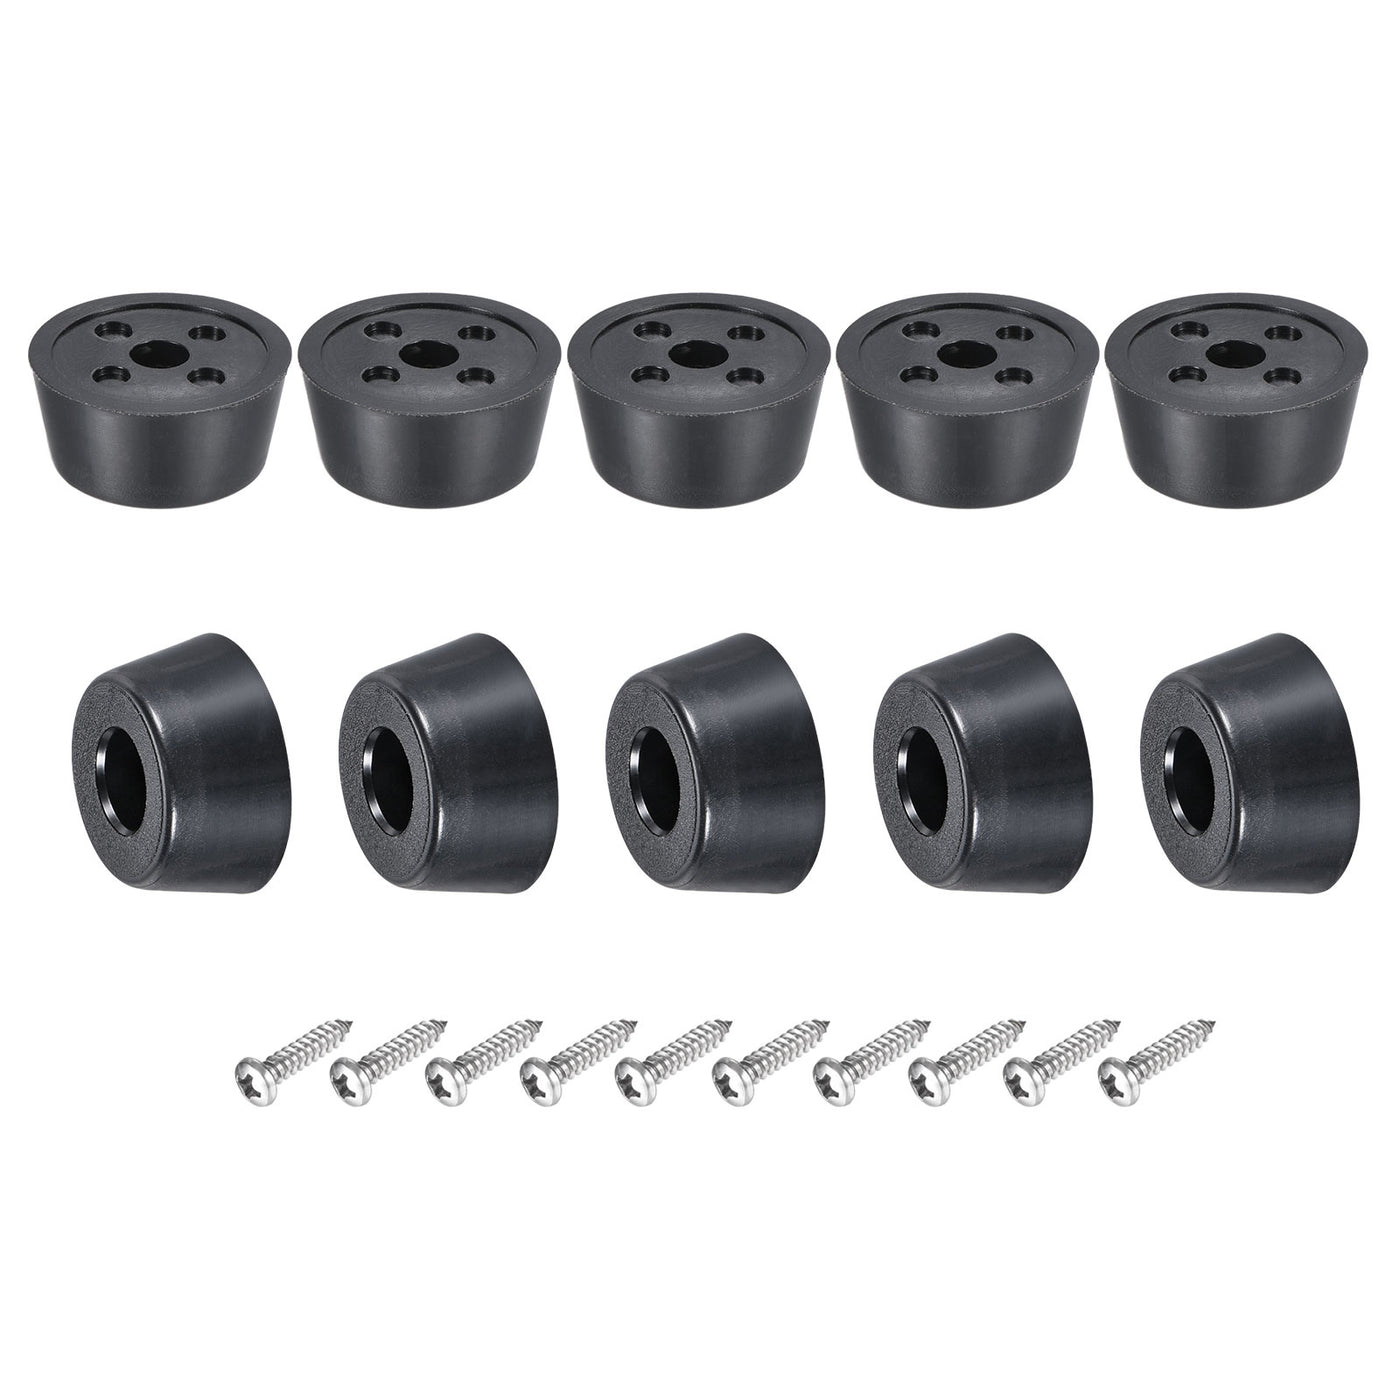 uxcell Uxcell Rubber Bumper Feet, 0.39" H x 0.87" W Round Pads with Stainless Steel Washer and Screws for Furniture, Appliances, Electronics 10 Pcs